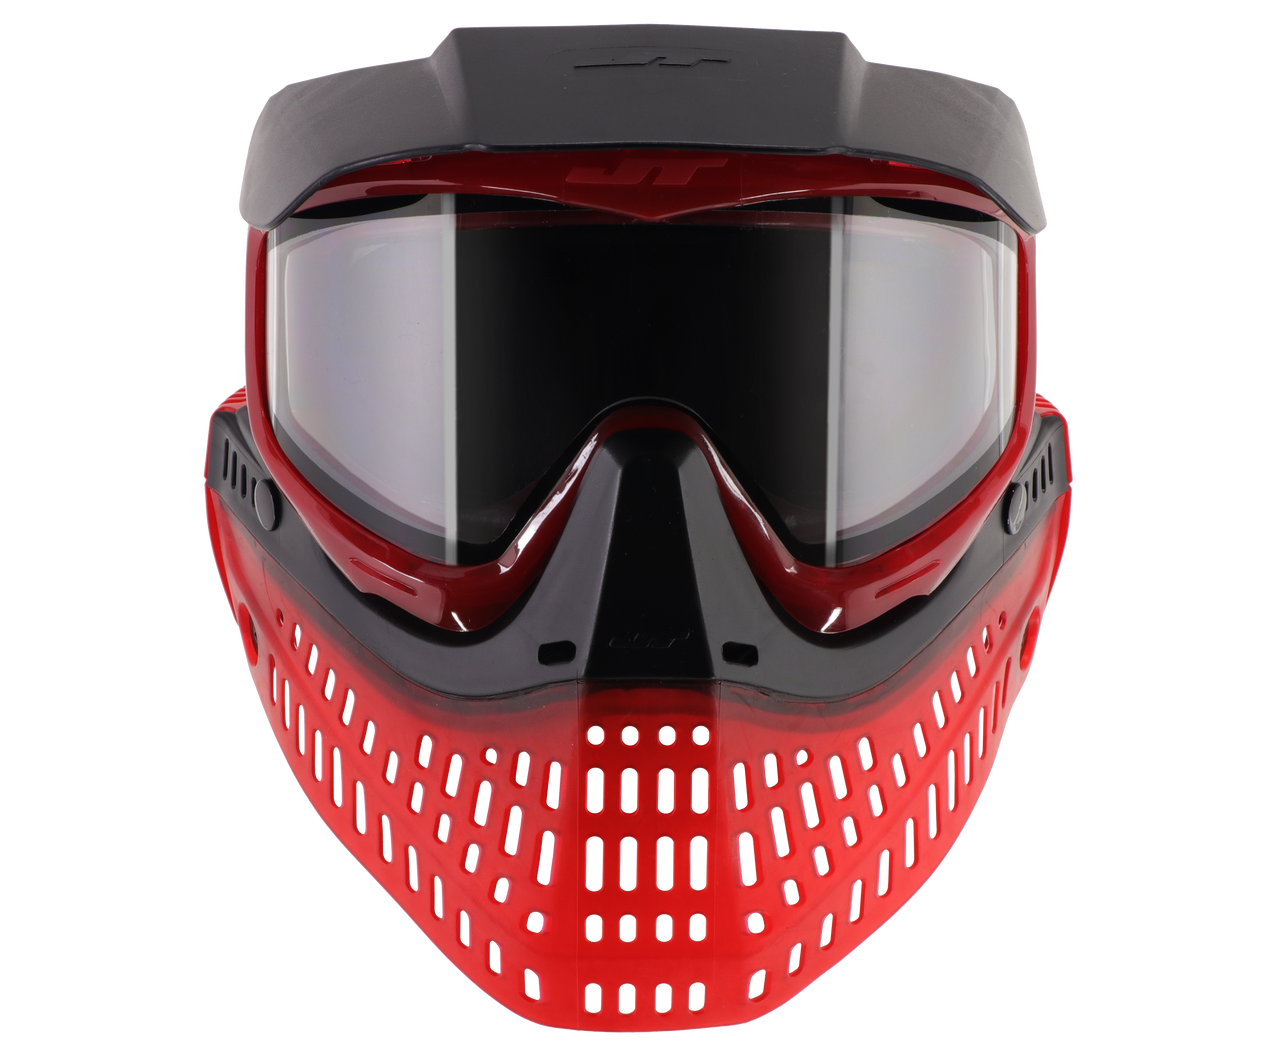 ICE Limited Edition JT Proflex Paintball Goggle Mask STRAP ONLY - Black &  Red